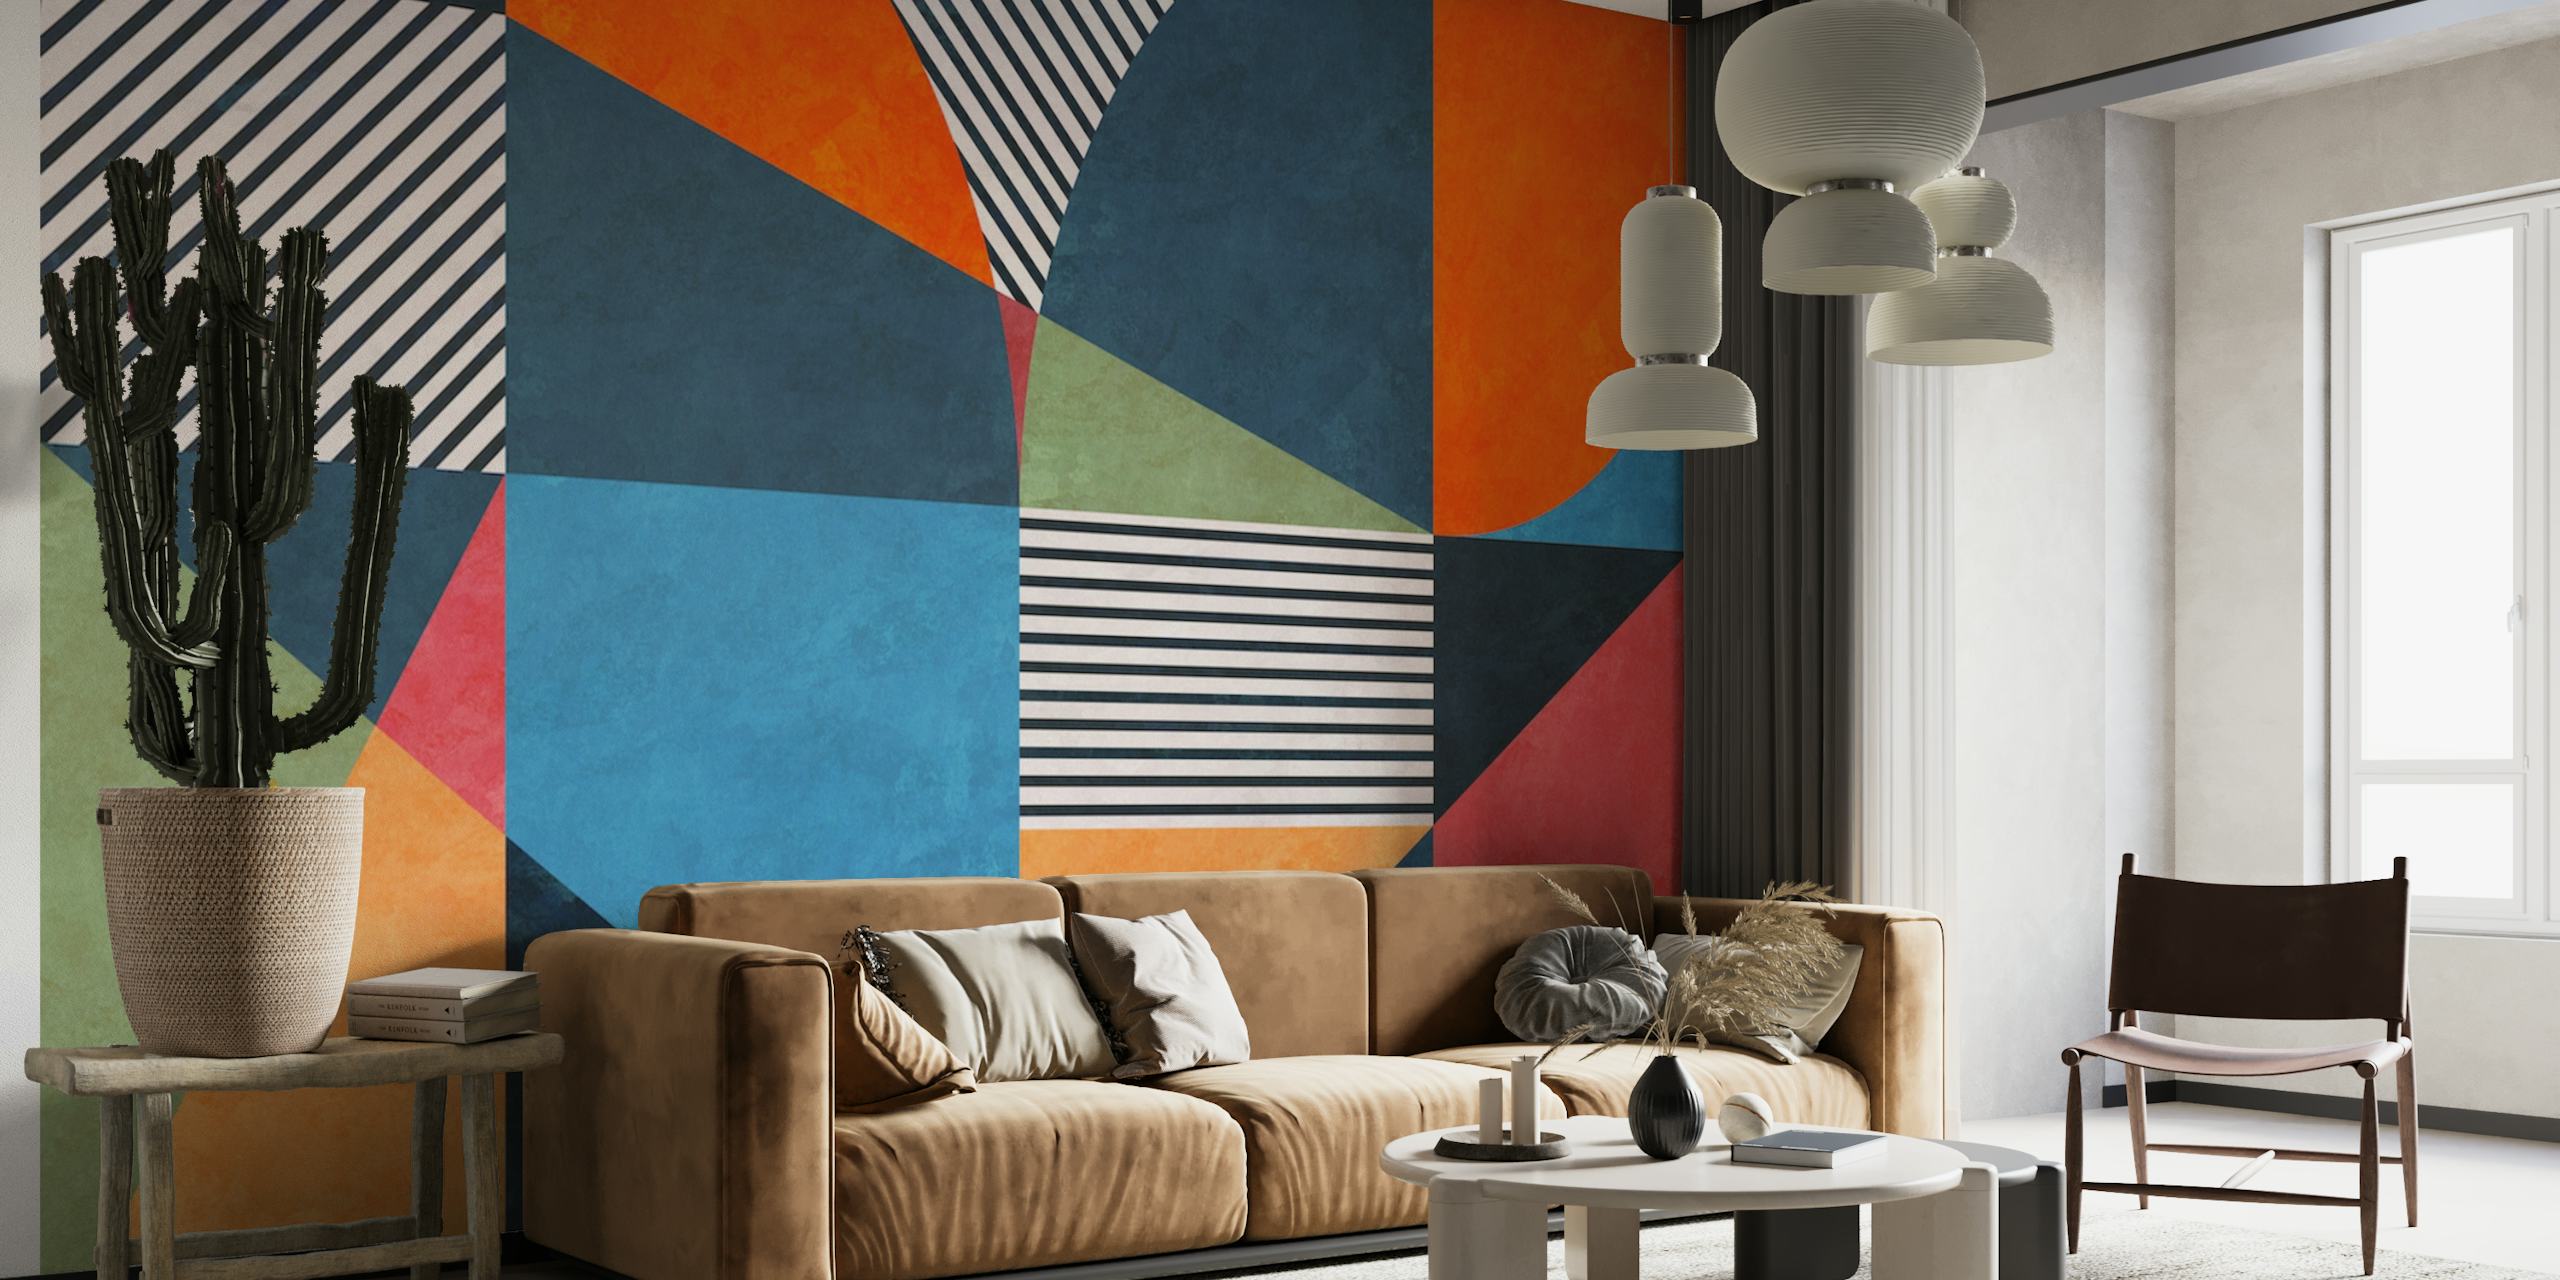 Geometric patchwork heart wall mural with a mix of stripes and solid colors in blue, orange, and black